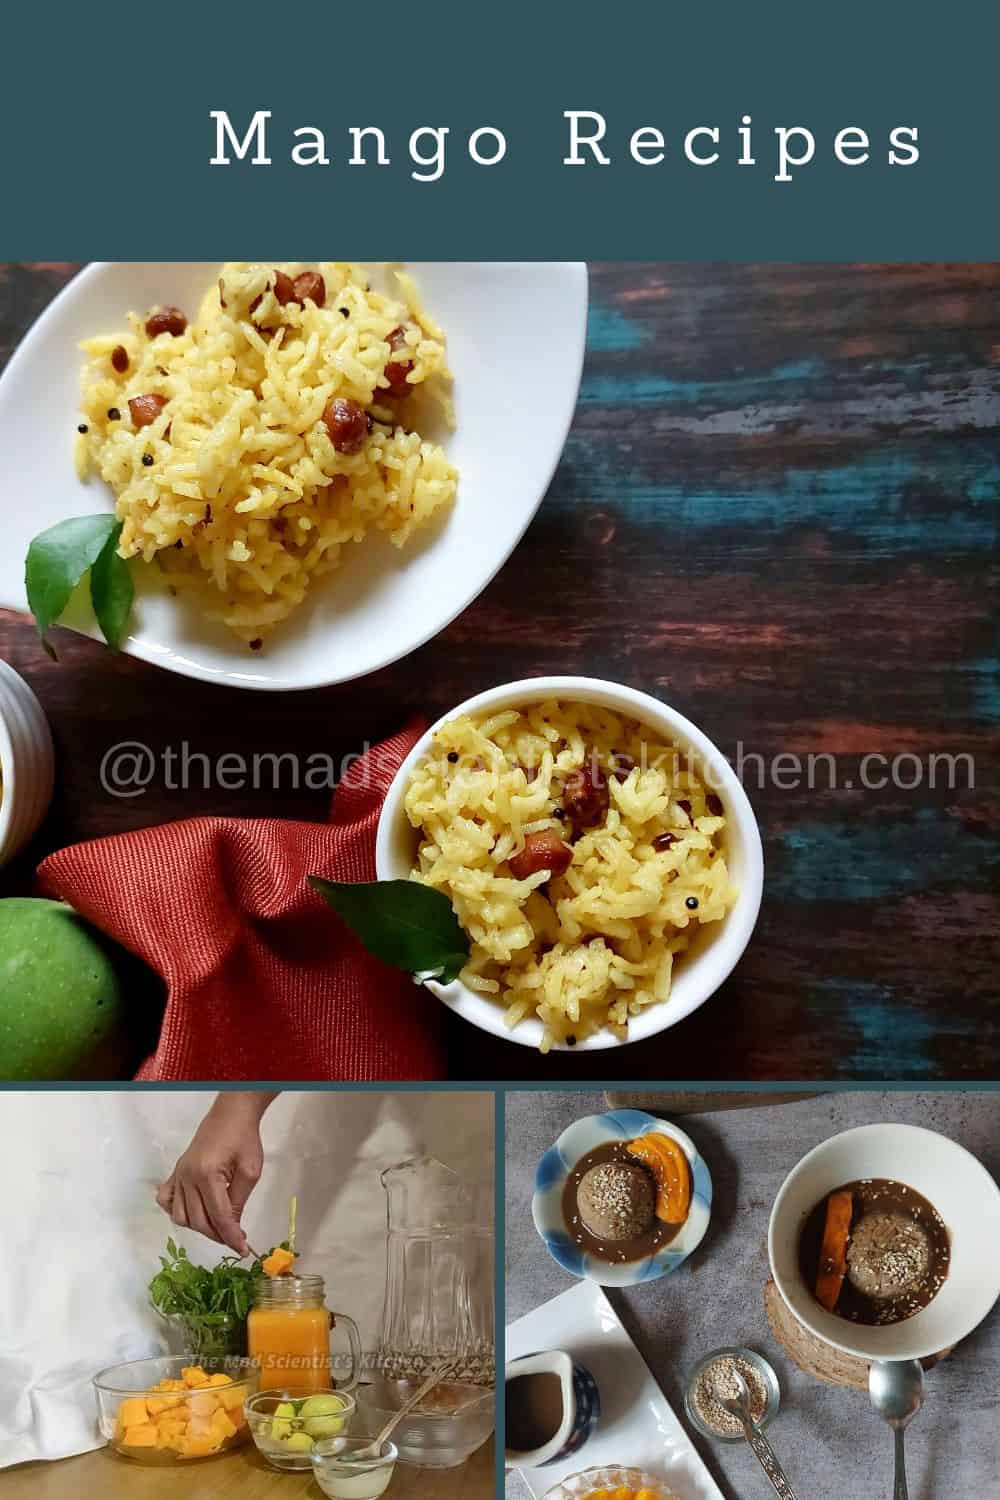 The ways in which mangoes can be used in rice and to make a drink